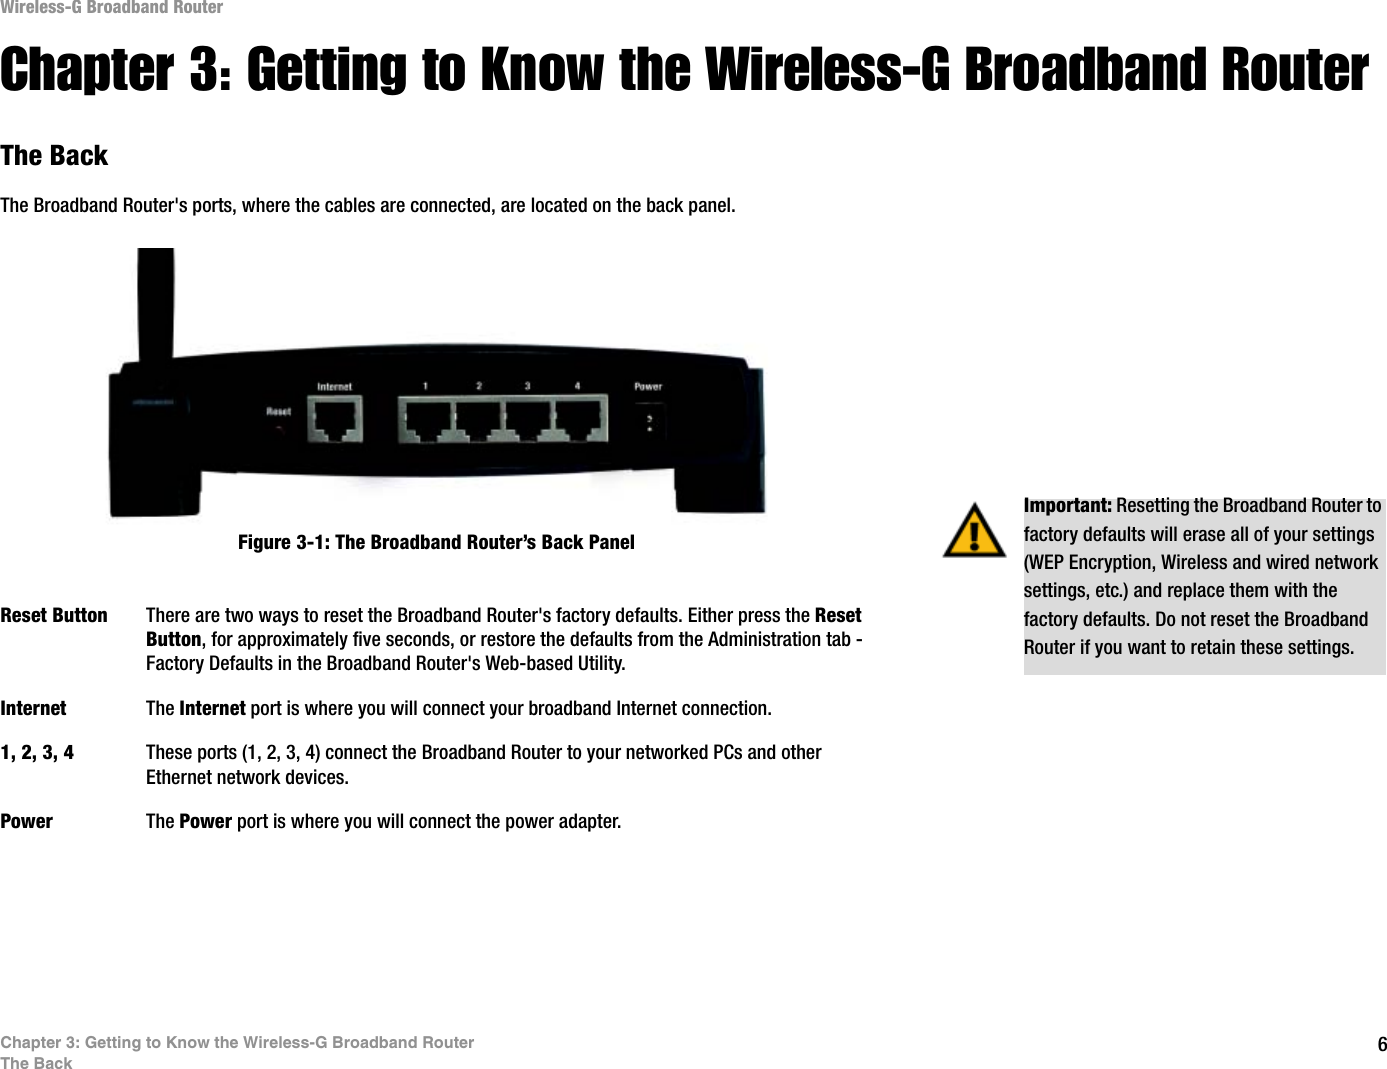 6Chapter 3: Getting to Know the Wireless-G Broadband RouterThe BackWireless-G Broadband RouterChapter 3: Getting to Know the Wireless-G Broadband RouterThe BackThe Broadband Router&apos;s ports, where the cables are connected, are located on the back panel.Reset Button There are two ways to reset the Broadband Router&apos;s factory defaults. Either press the ResetButton, for approximately five seconds, or restore the defaults from the Administration tab - Factory Defaults in the Broadband Router&apos;s Web-based Utility.Internet The Internet port is where you will connect your broadband Internet connection.1, 2, 3, 4 These ports (1, 2, 3, 4) connect the Broadband Router to your networked PCs and other Ethernet network devices.Power The Power port is where you will connect the power adapter.Important: Resetting the Broadband Router to factory defaults will erase all of your settings (WEP Encryption, Wireless and wired network settings, etc.) and replace them with the factory defaults. Do not reset the Broadband Router if you want to retain these settings.Figure 3-1: The Broadband Router’s Back Panel